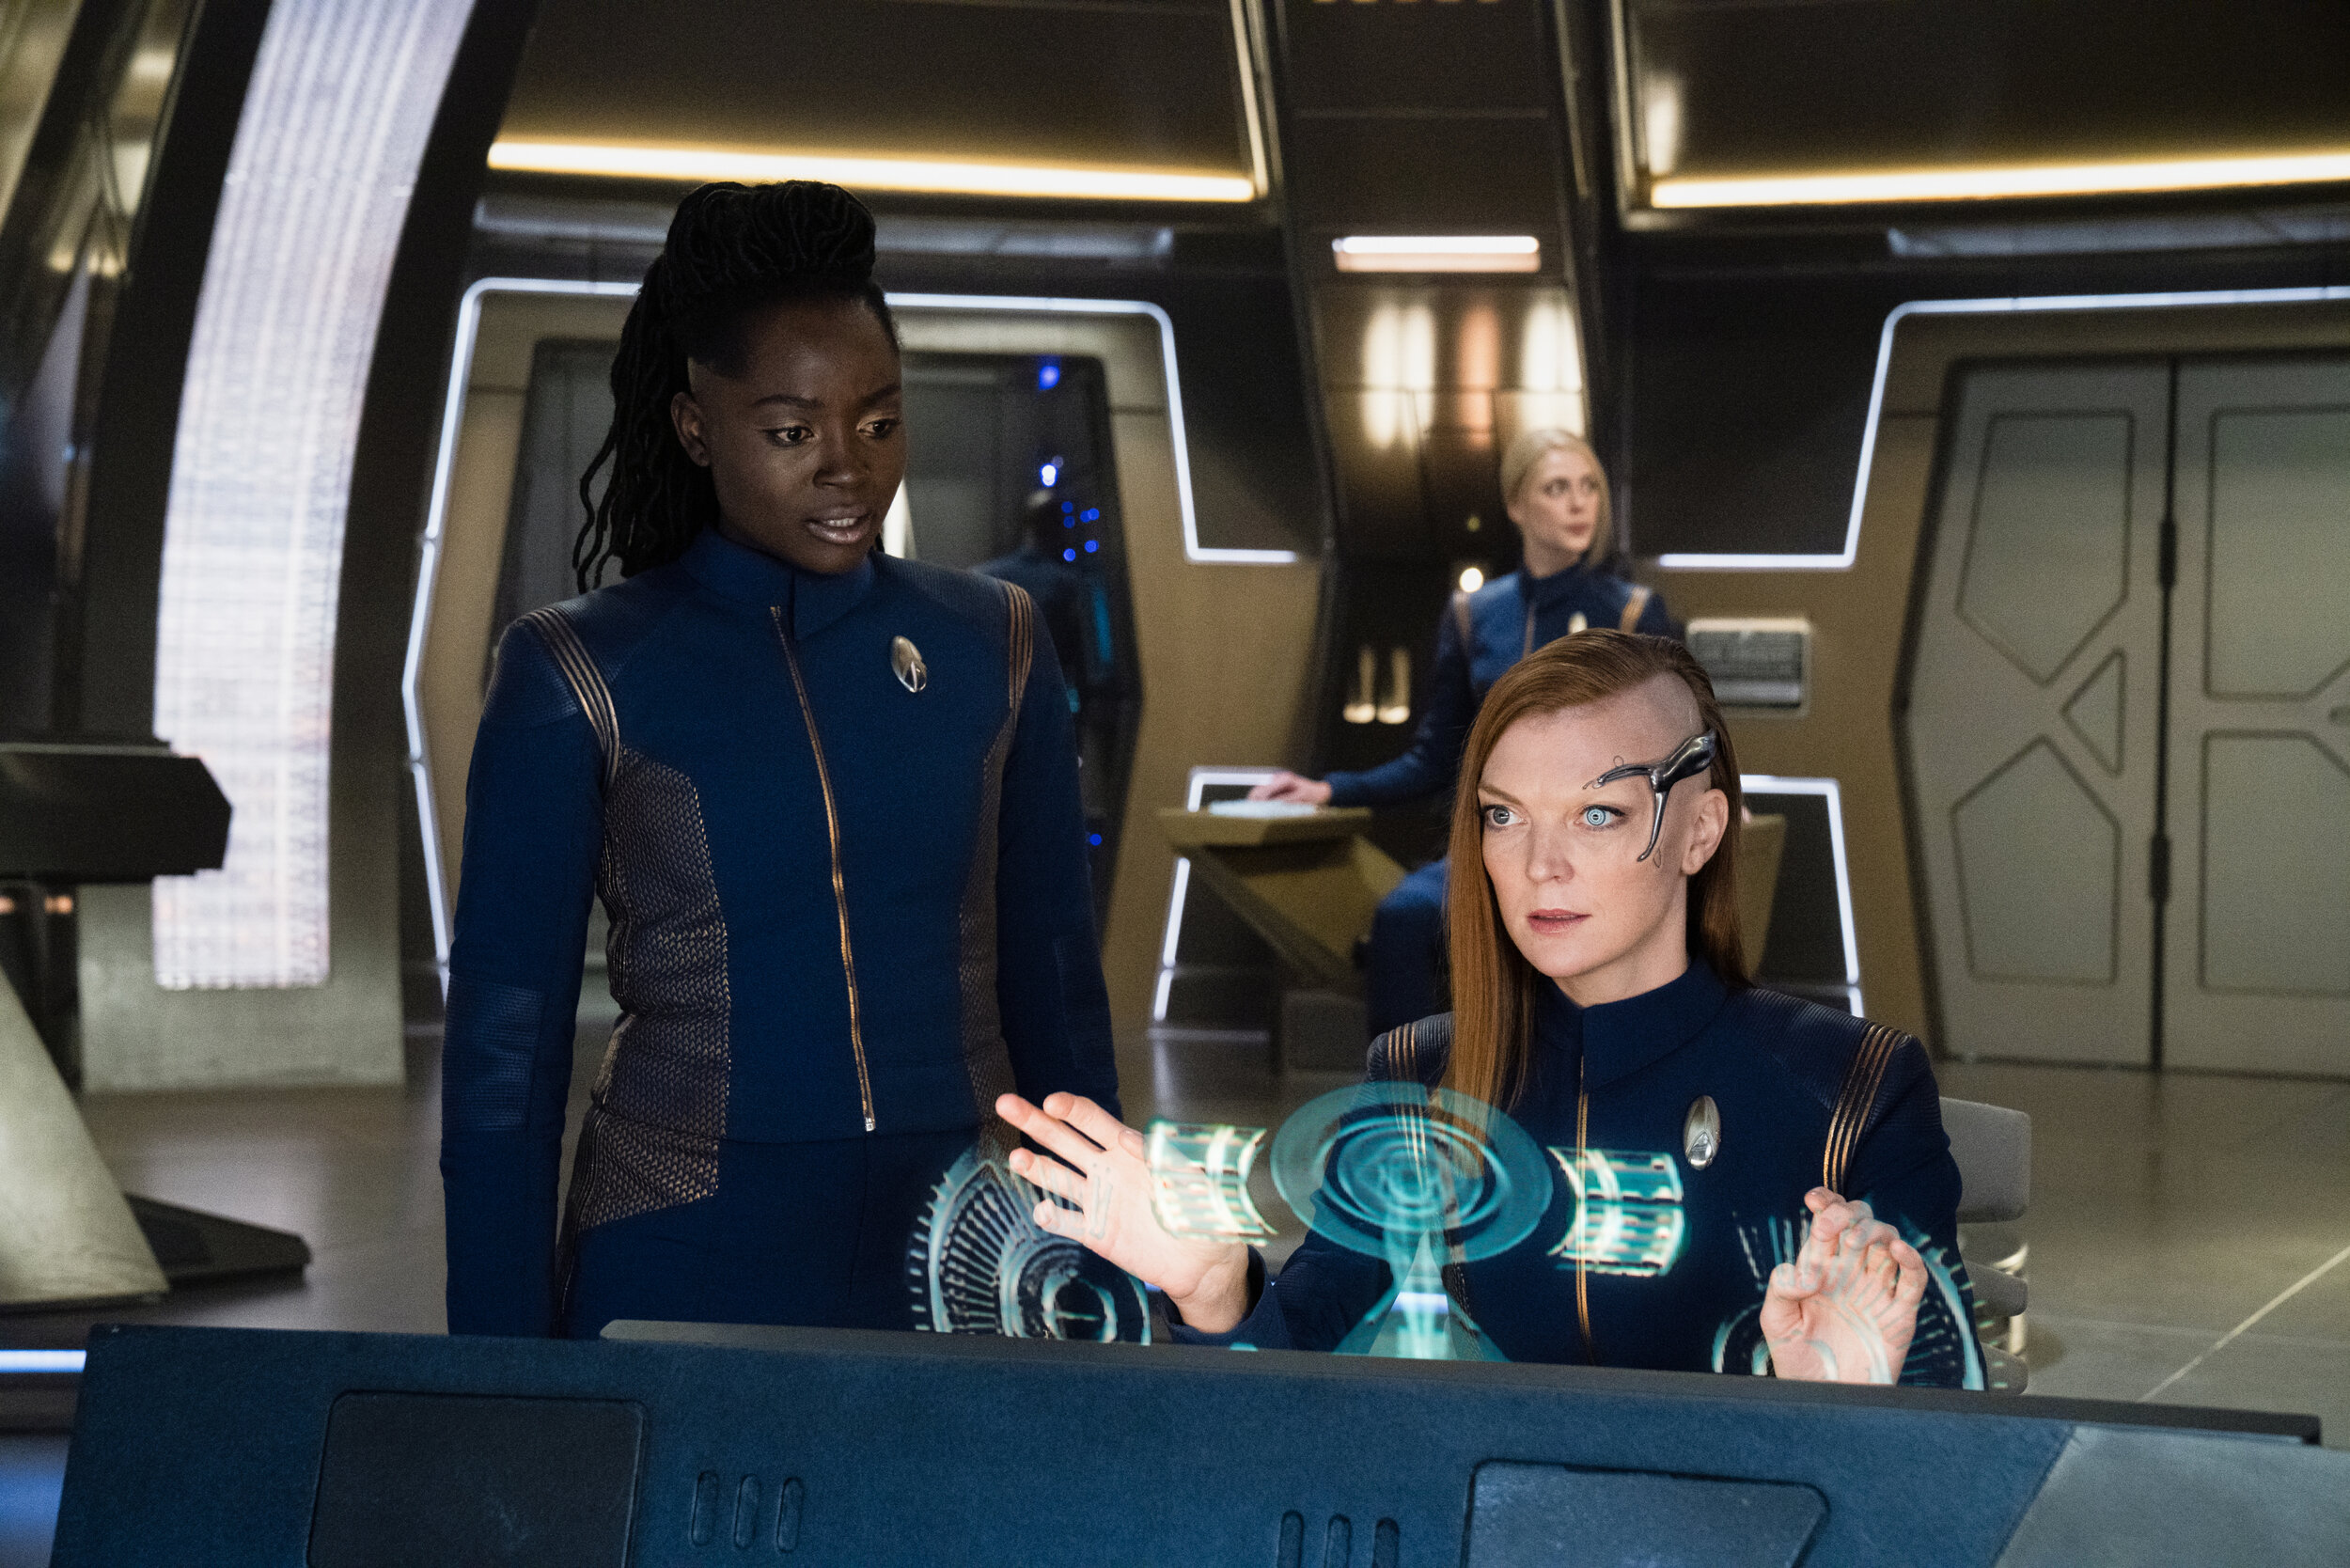   "The Sanctuary" -- Ep#308 -- Pictured: Oyin Oladejo as Lt. Joann Owosekun and Emily Coutts as Lt. Keyla Detmer of the CBS All Access series STAR TREK: DISCOVERY. Photo Cr: Michael Gibson/CBS ©2020 CBS Interactive, Inc. All Rights Reserved.  